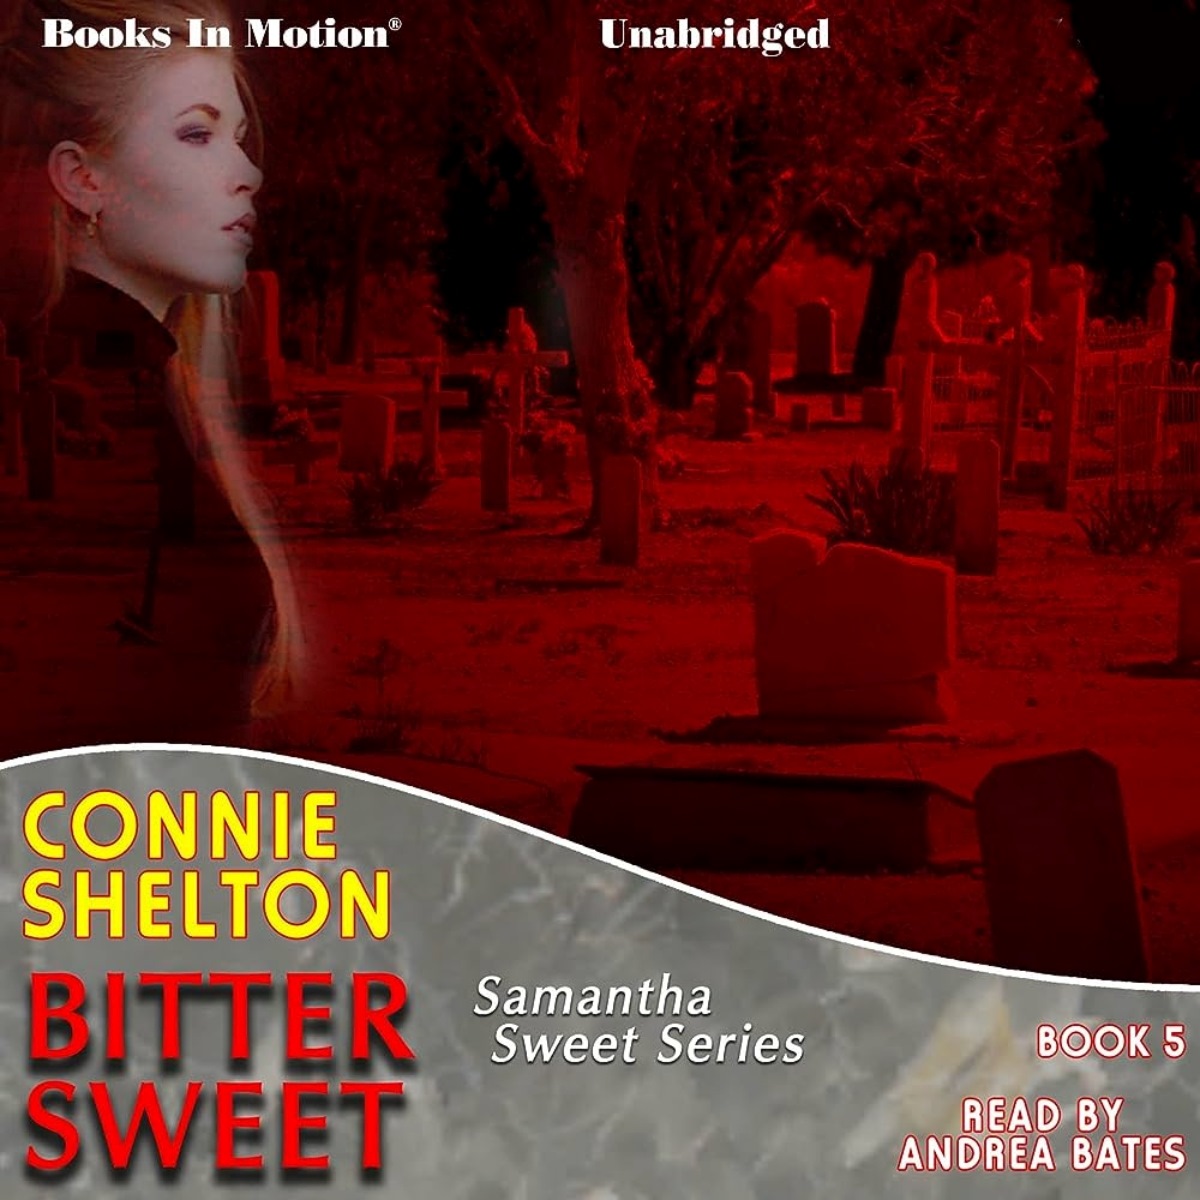 13-best-samantha-sweet-series-by-connie-shelton-on-kindle-for-2023